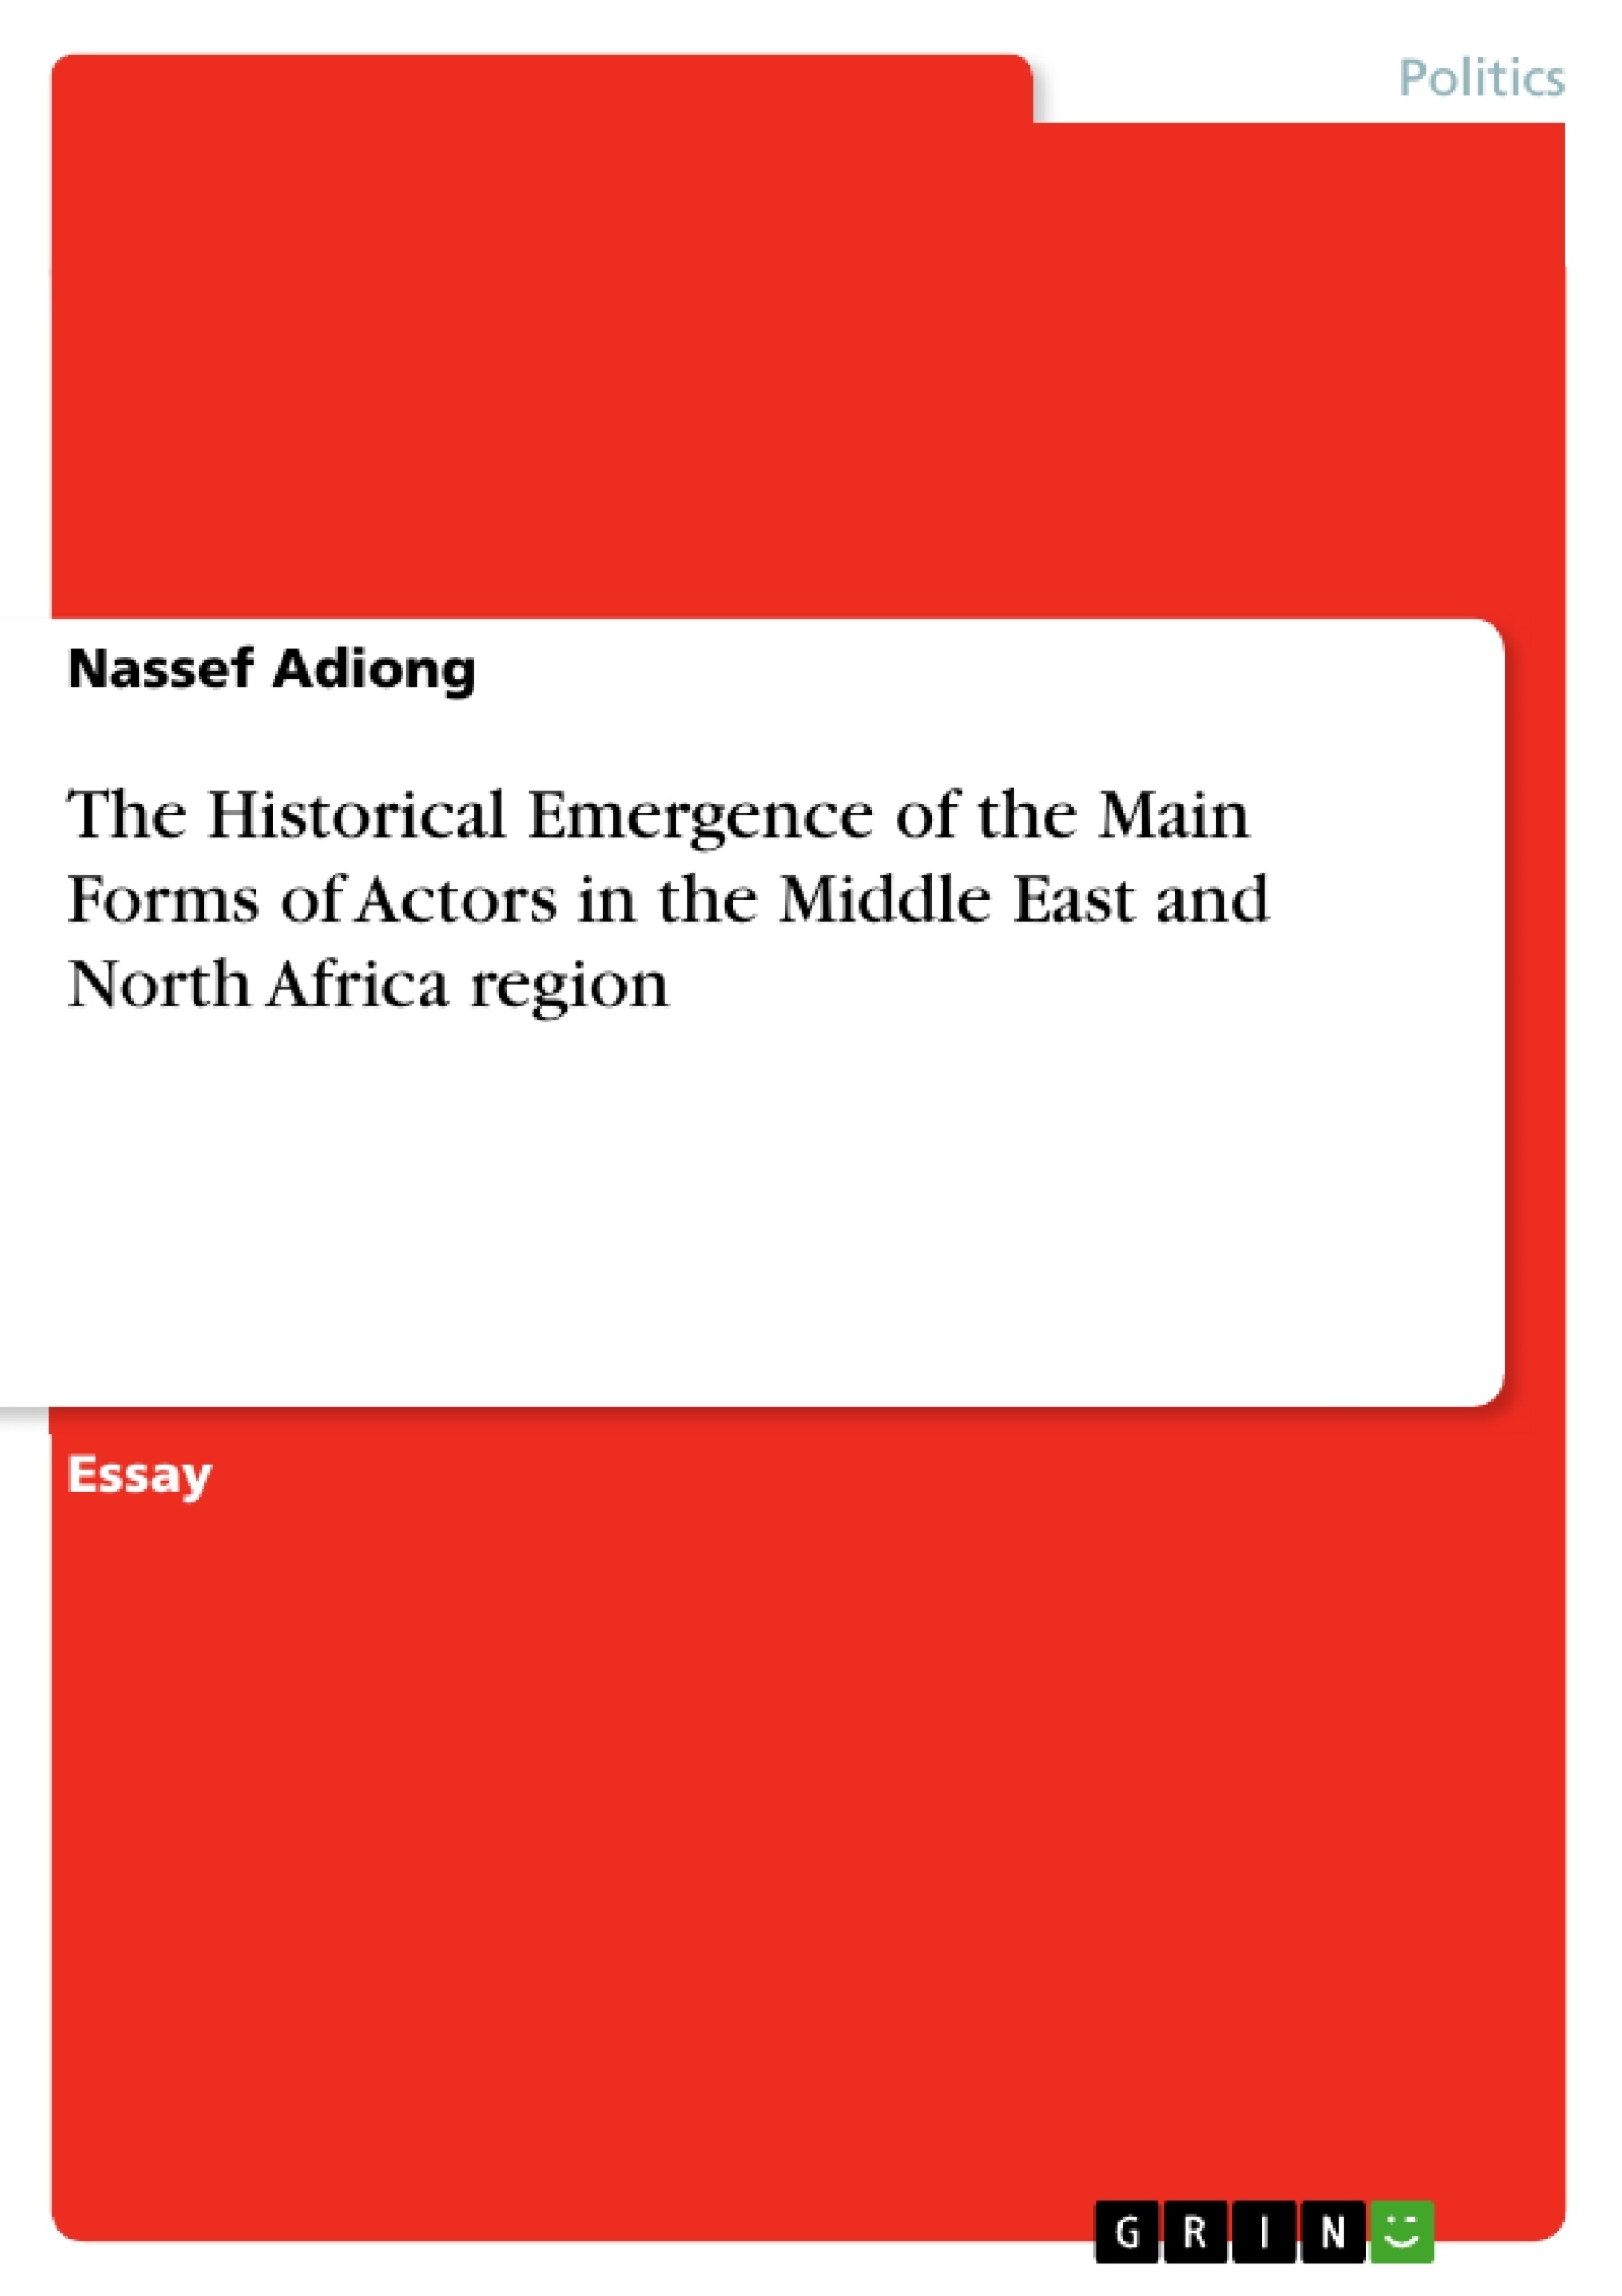 Titel: The Historical Emergence of the Main Forms of Actors in the Middle East and North Africa region 